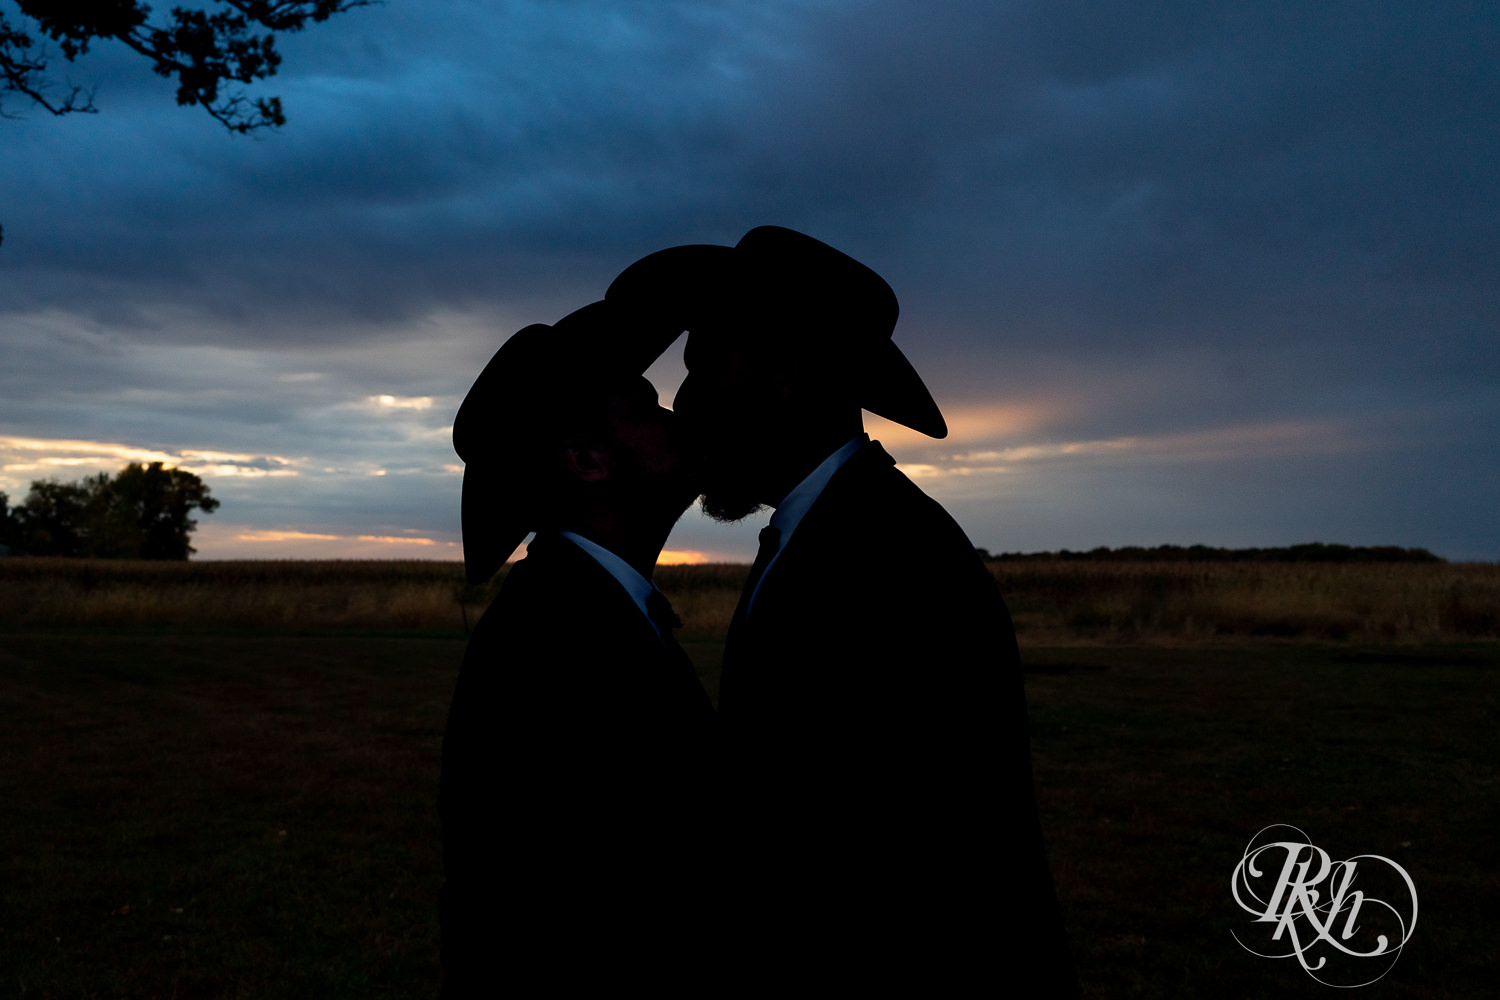 Grooms in cowboy hats kissing in silhouette on their wedding day.